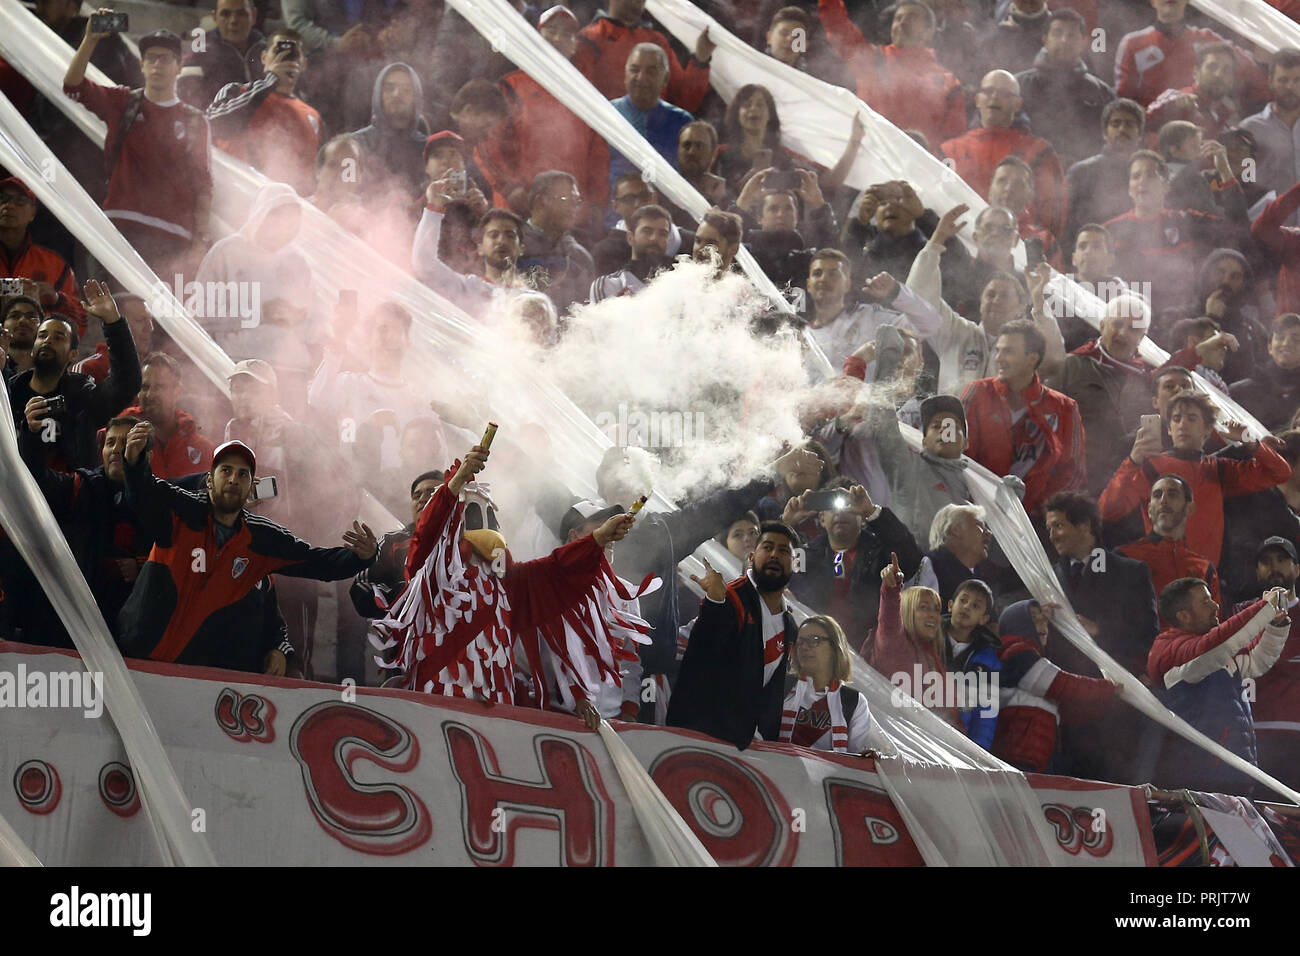 River plate fans in the beginning of the match against Independiente in Buenos Aires, Argentina Stock Photo